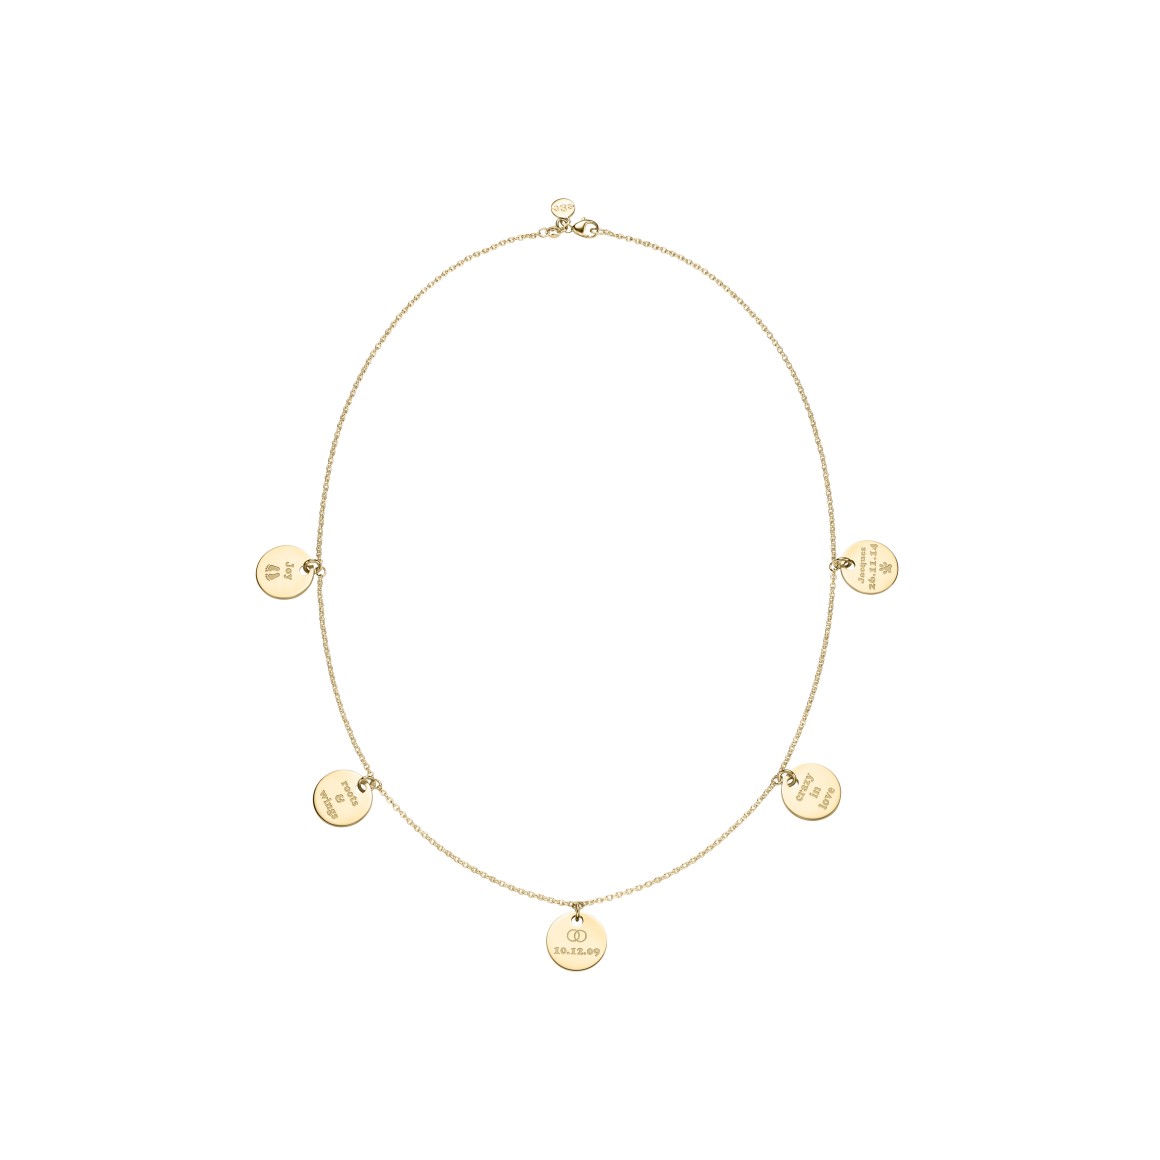 delicate family necklace 18 karat gold